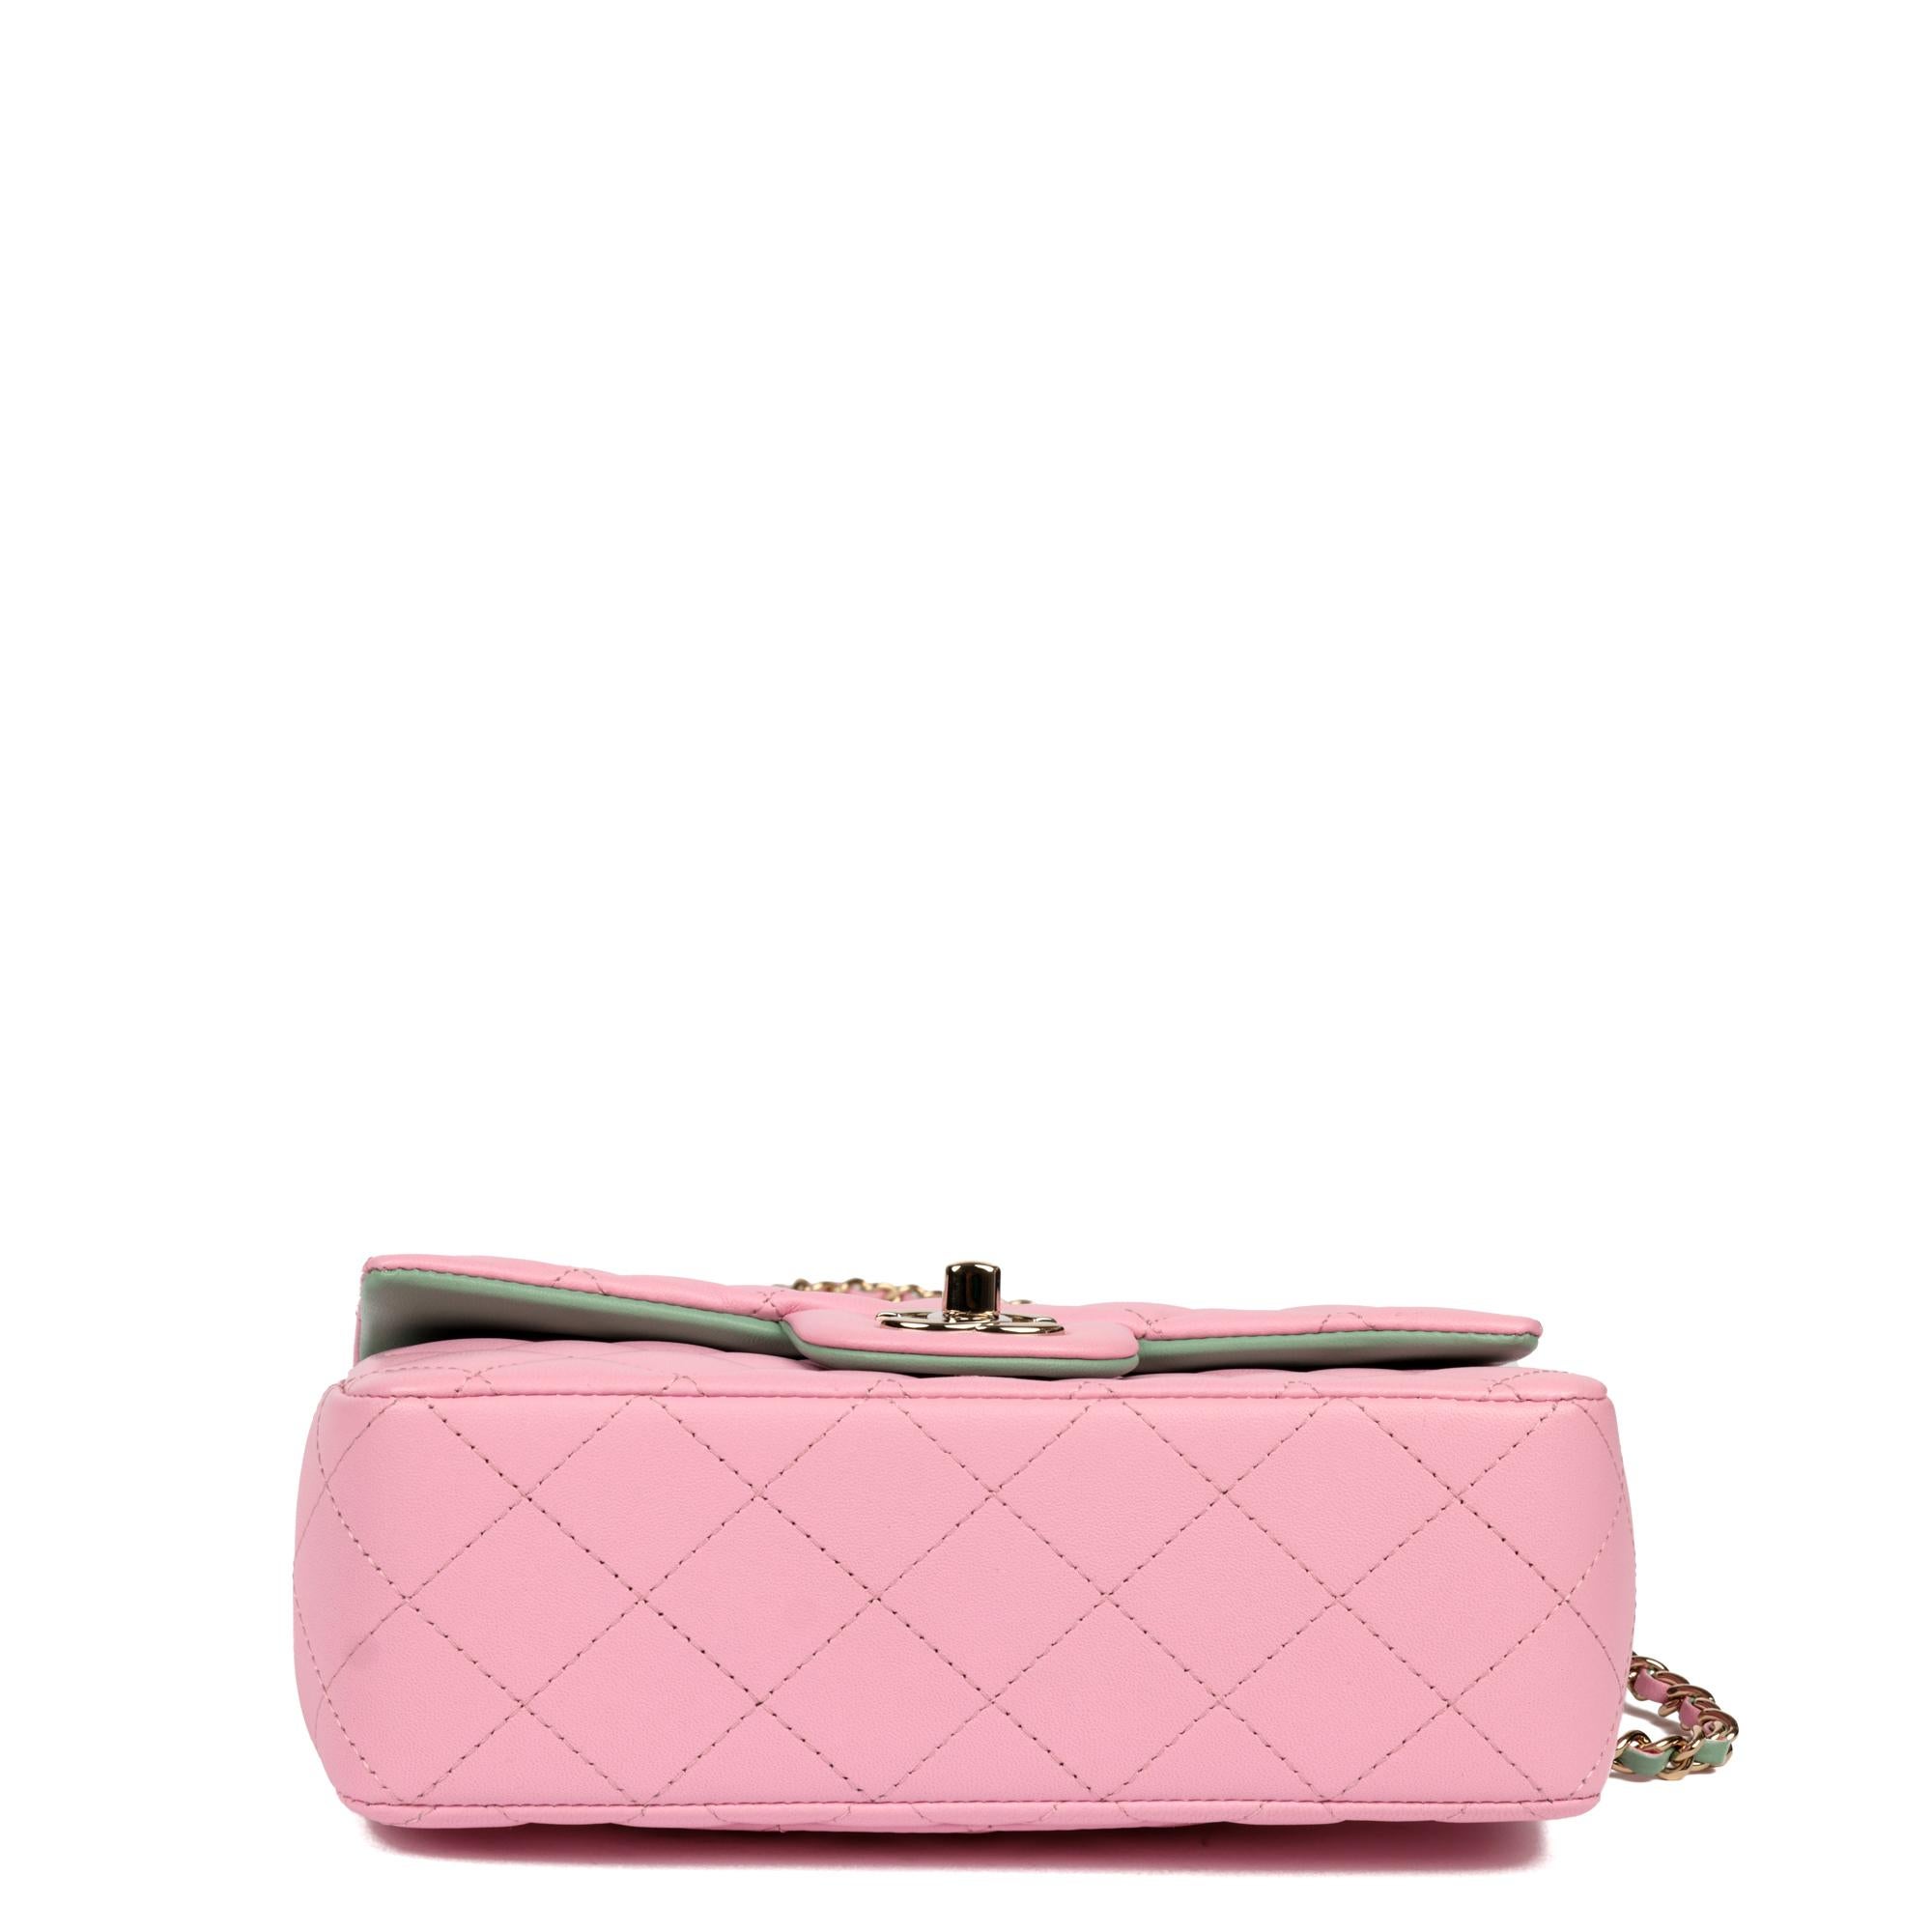 Chanel Pink & Green Quilted Lambskin Rectangular Mini Flap Bag with Top Handle For Sale 2